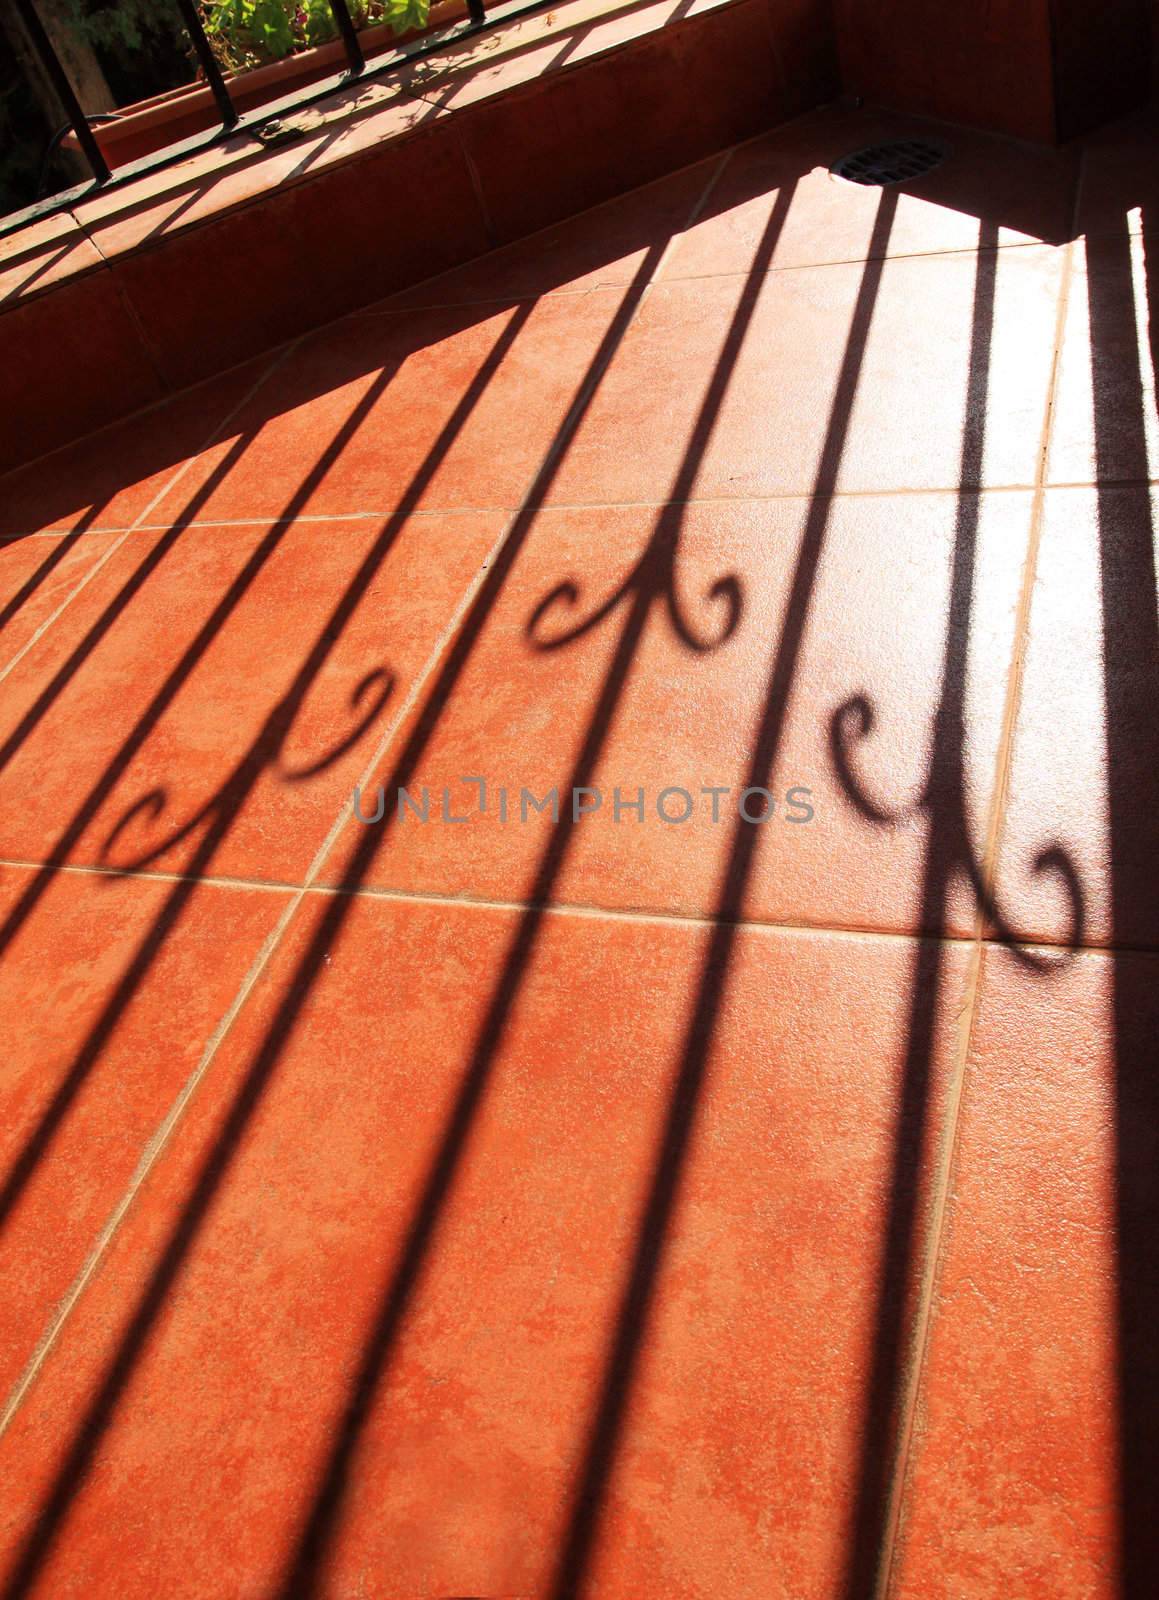 The grate shadow on a ceramic tiled balcony floor.Tiles are of bright terracota color .Shadow-pattern  looks geometric,   sharp enough and simetrical.